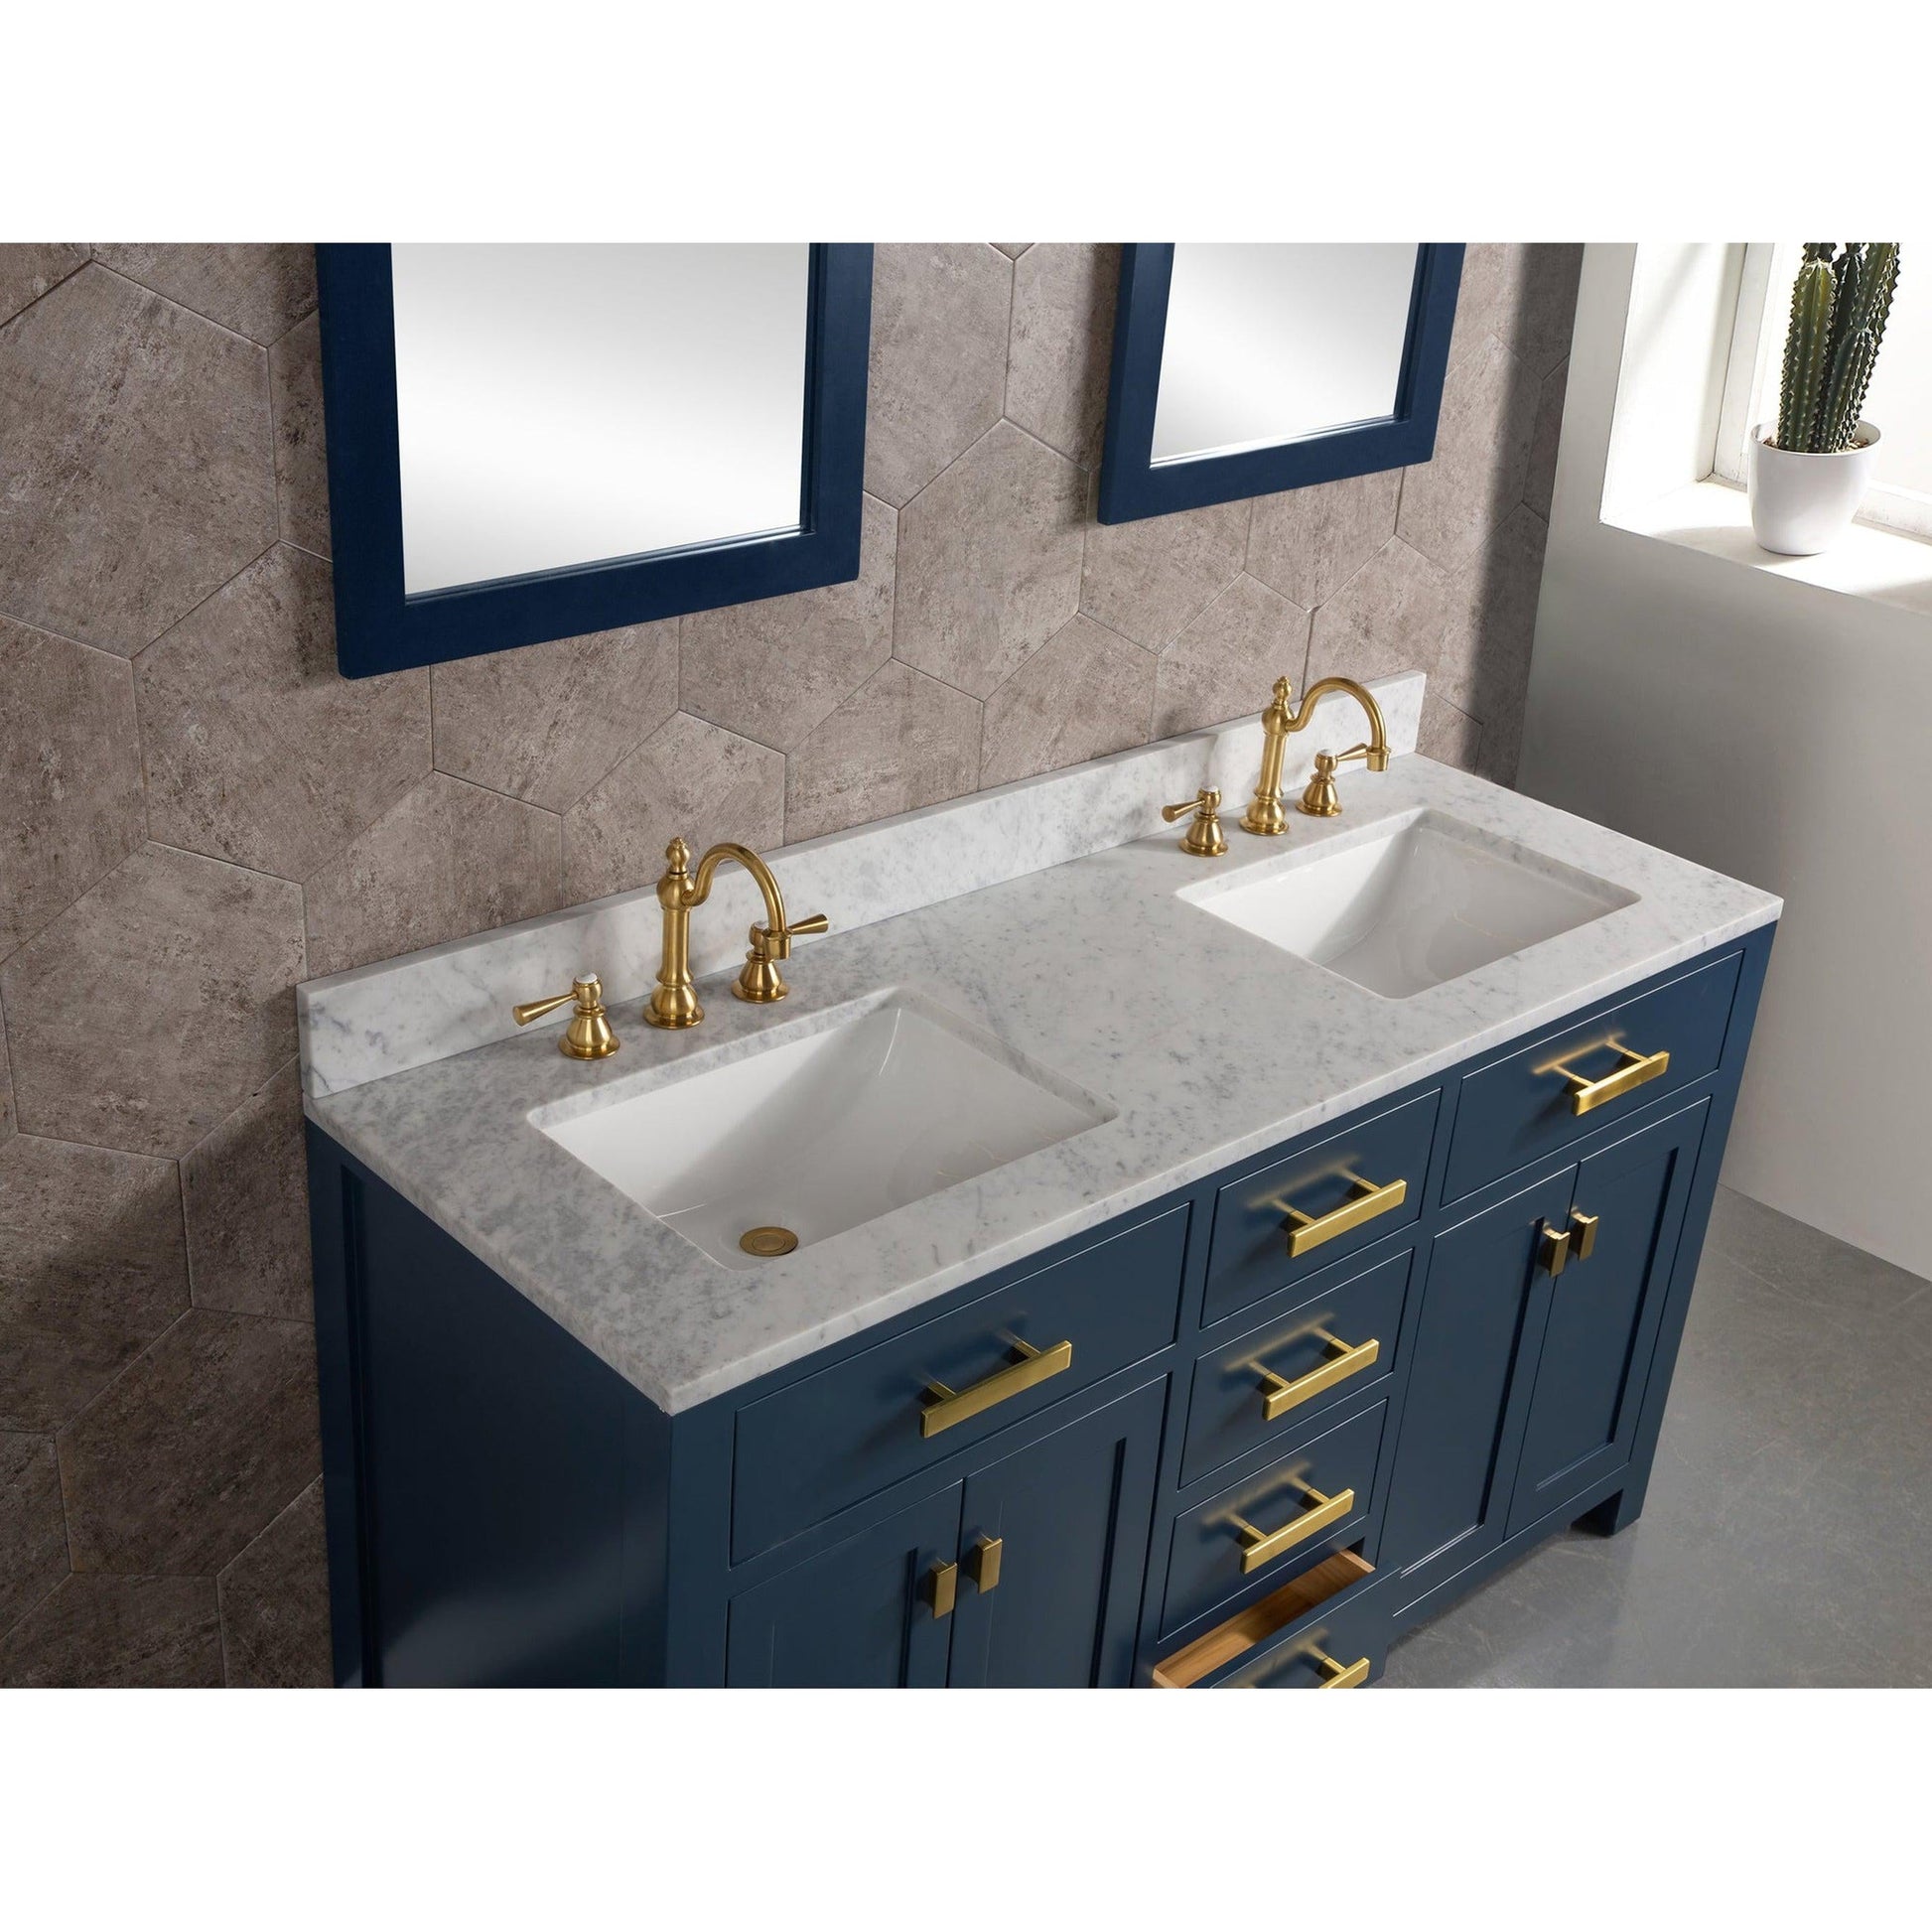 Water Creation Madison 60" Double Sink Carrara White Marble Vanity In Monarch BlueWith F2-0012-06-TL Lavatory Faucet(s)